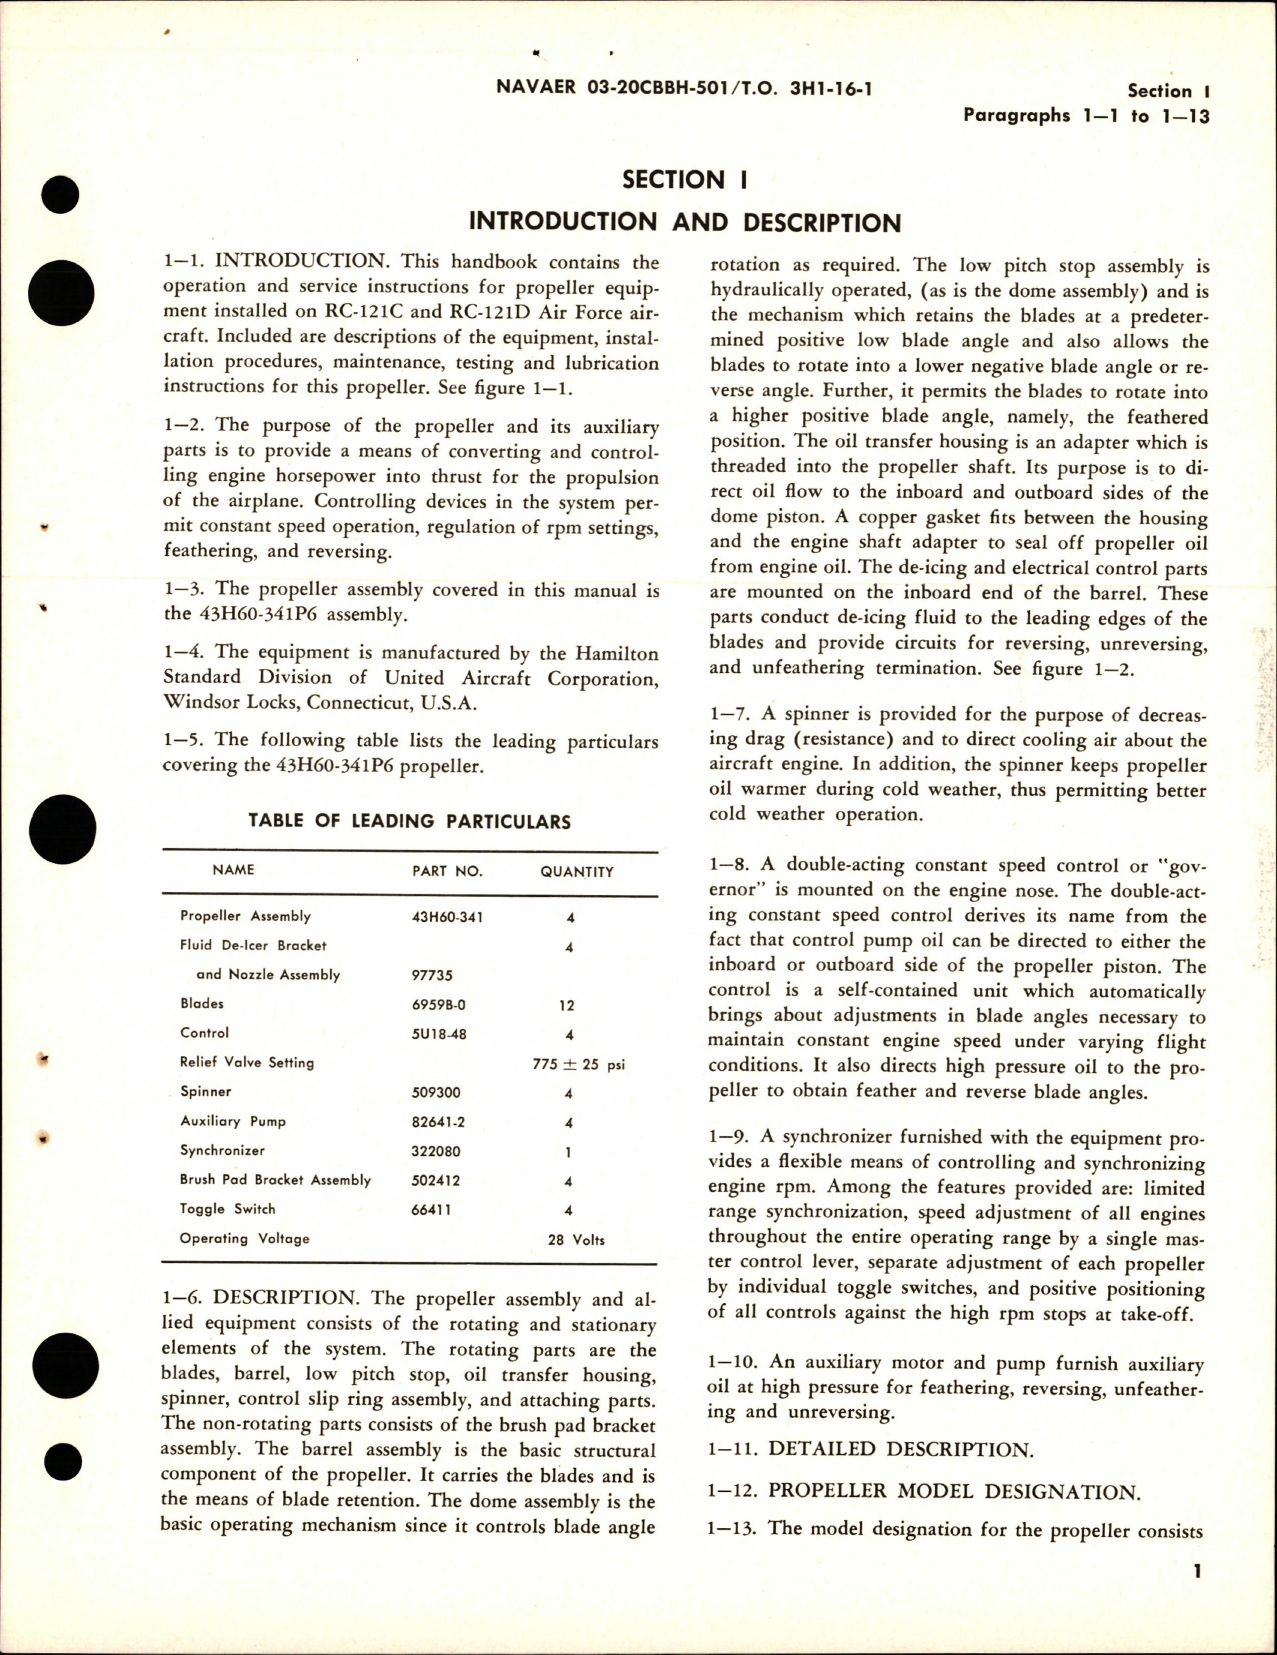 Sample page 5 from AirCorps Library document: Operation and Service Instructions for Variable Pitch Propeller - Model 43H60-341